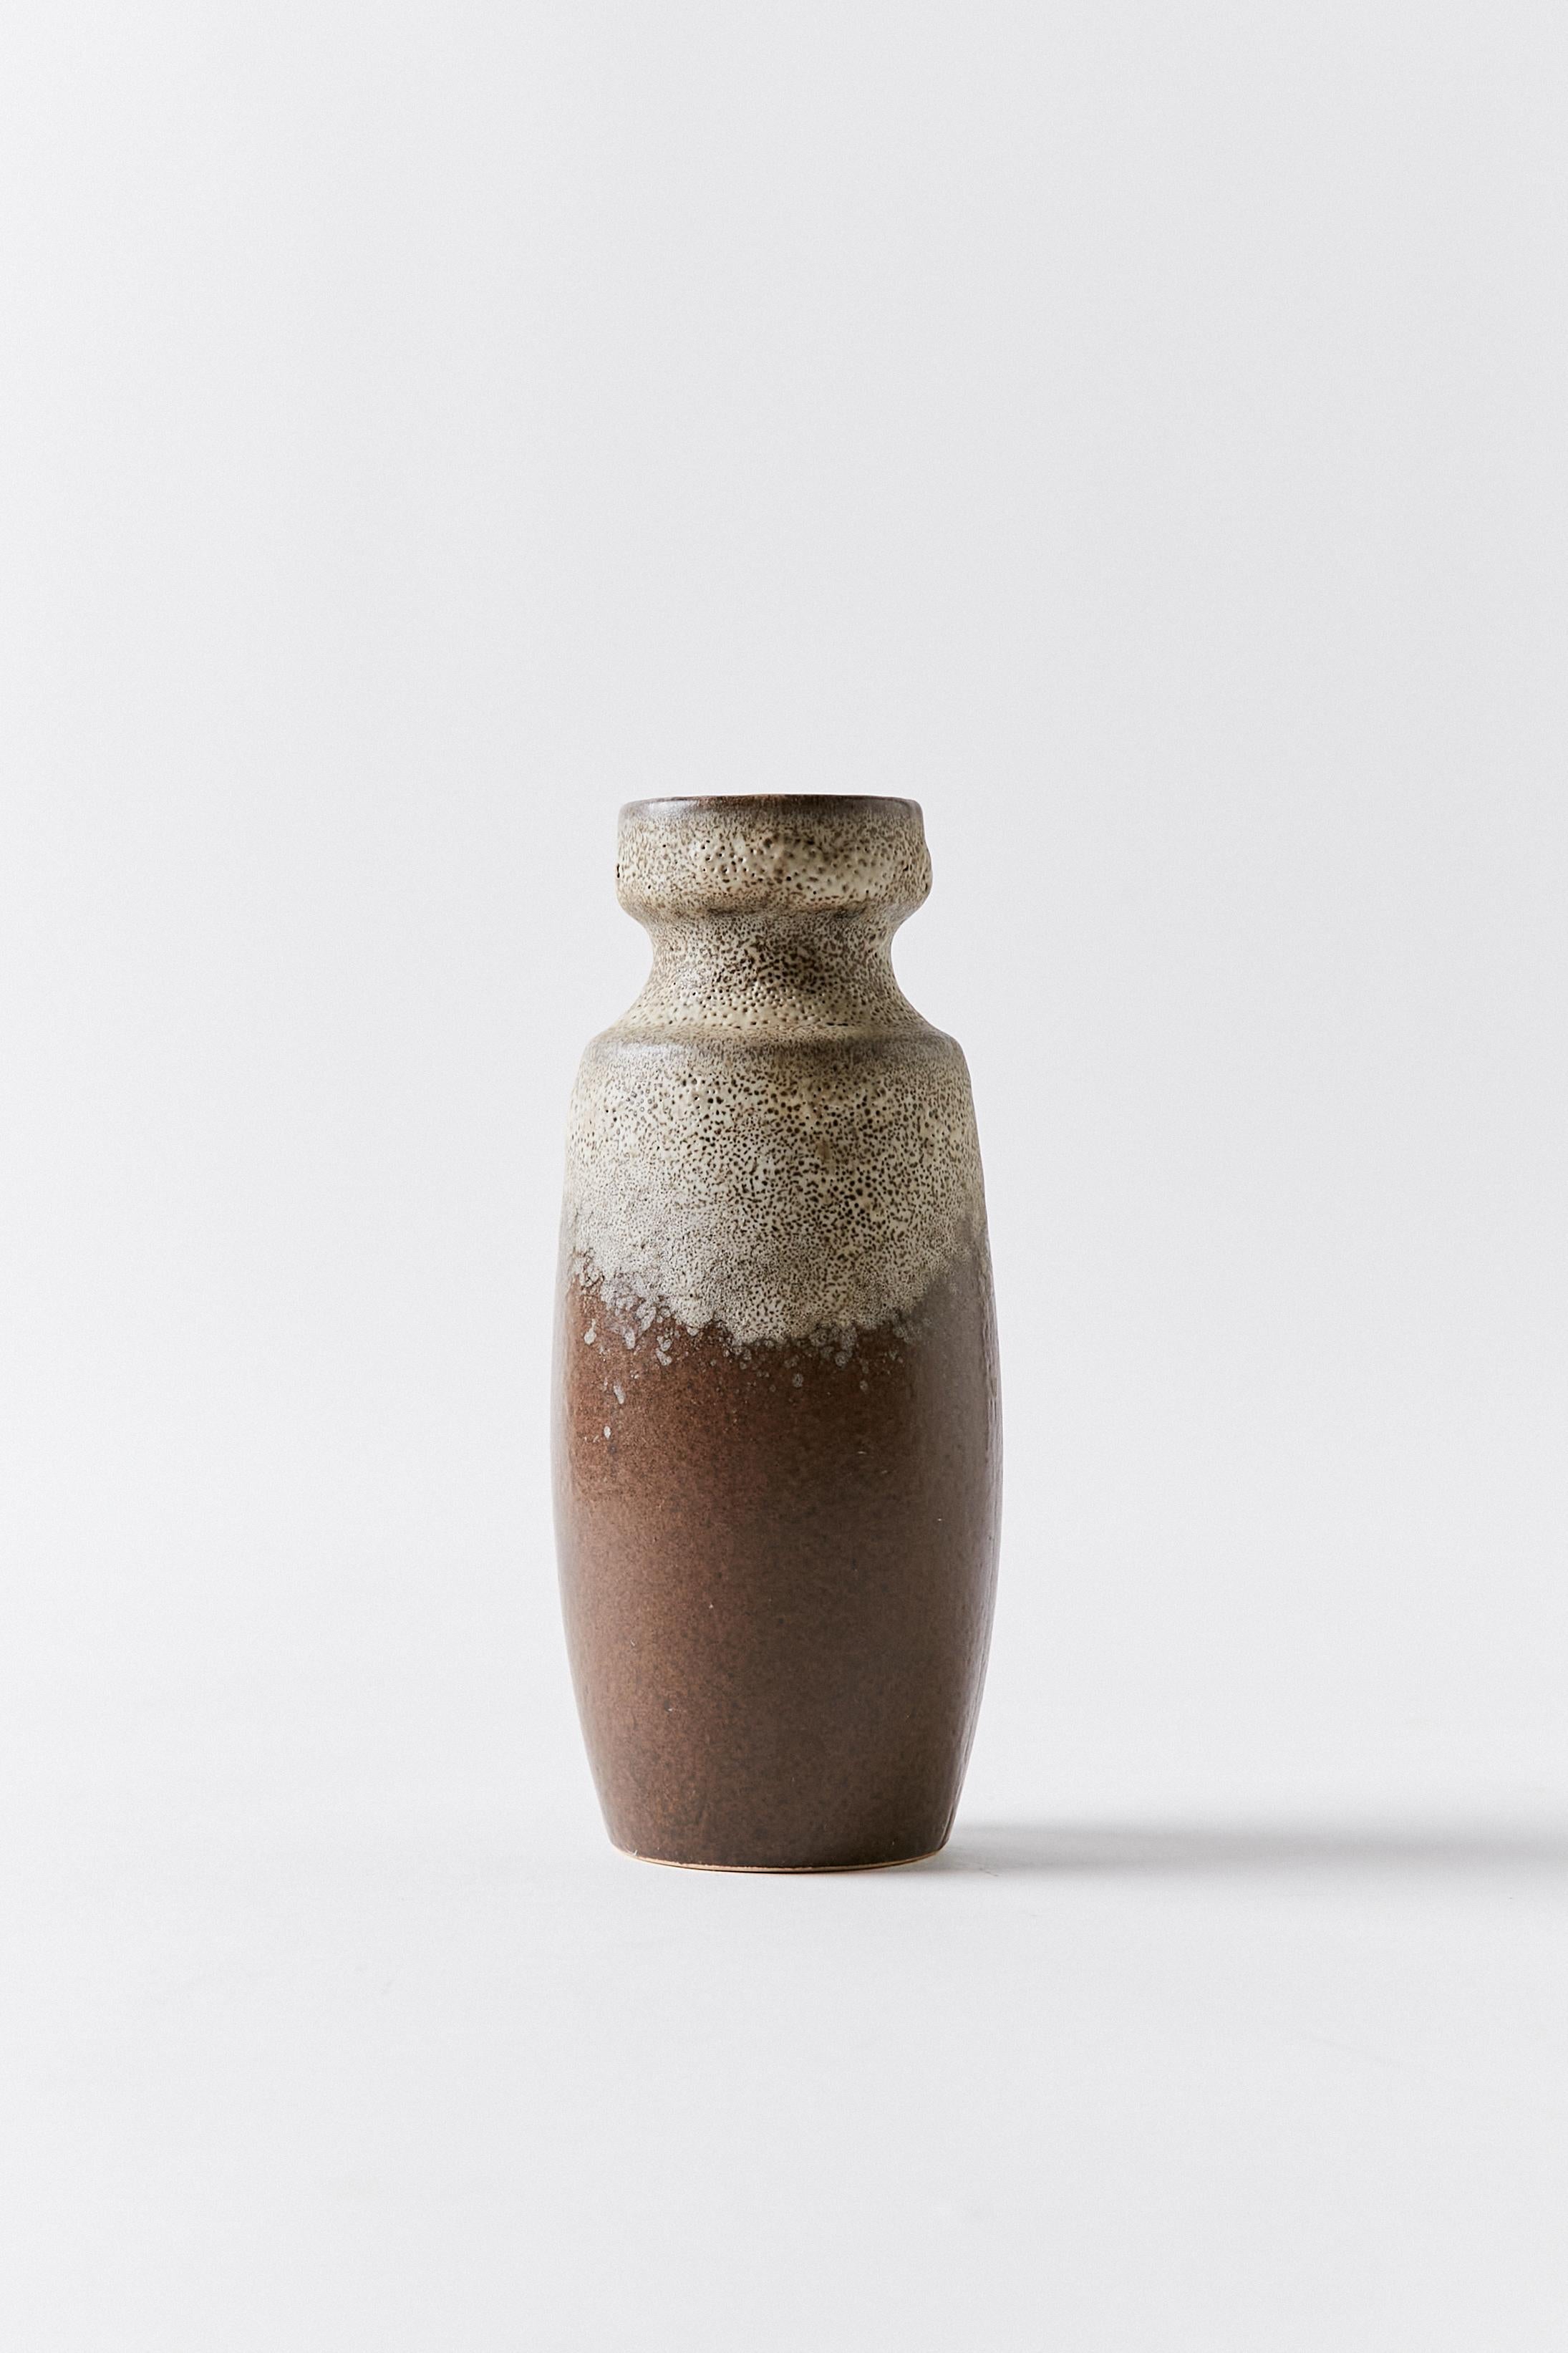 Fat lava vase in brown and textured grey tones. Made in West Germany in 1960s. Signature stamp on bottom.